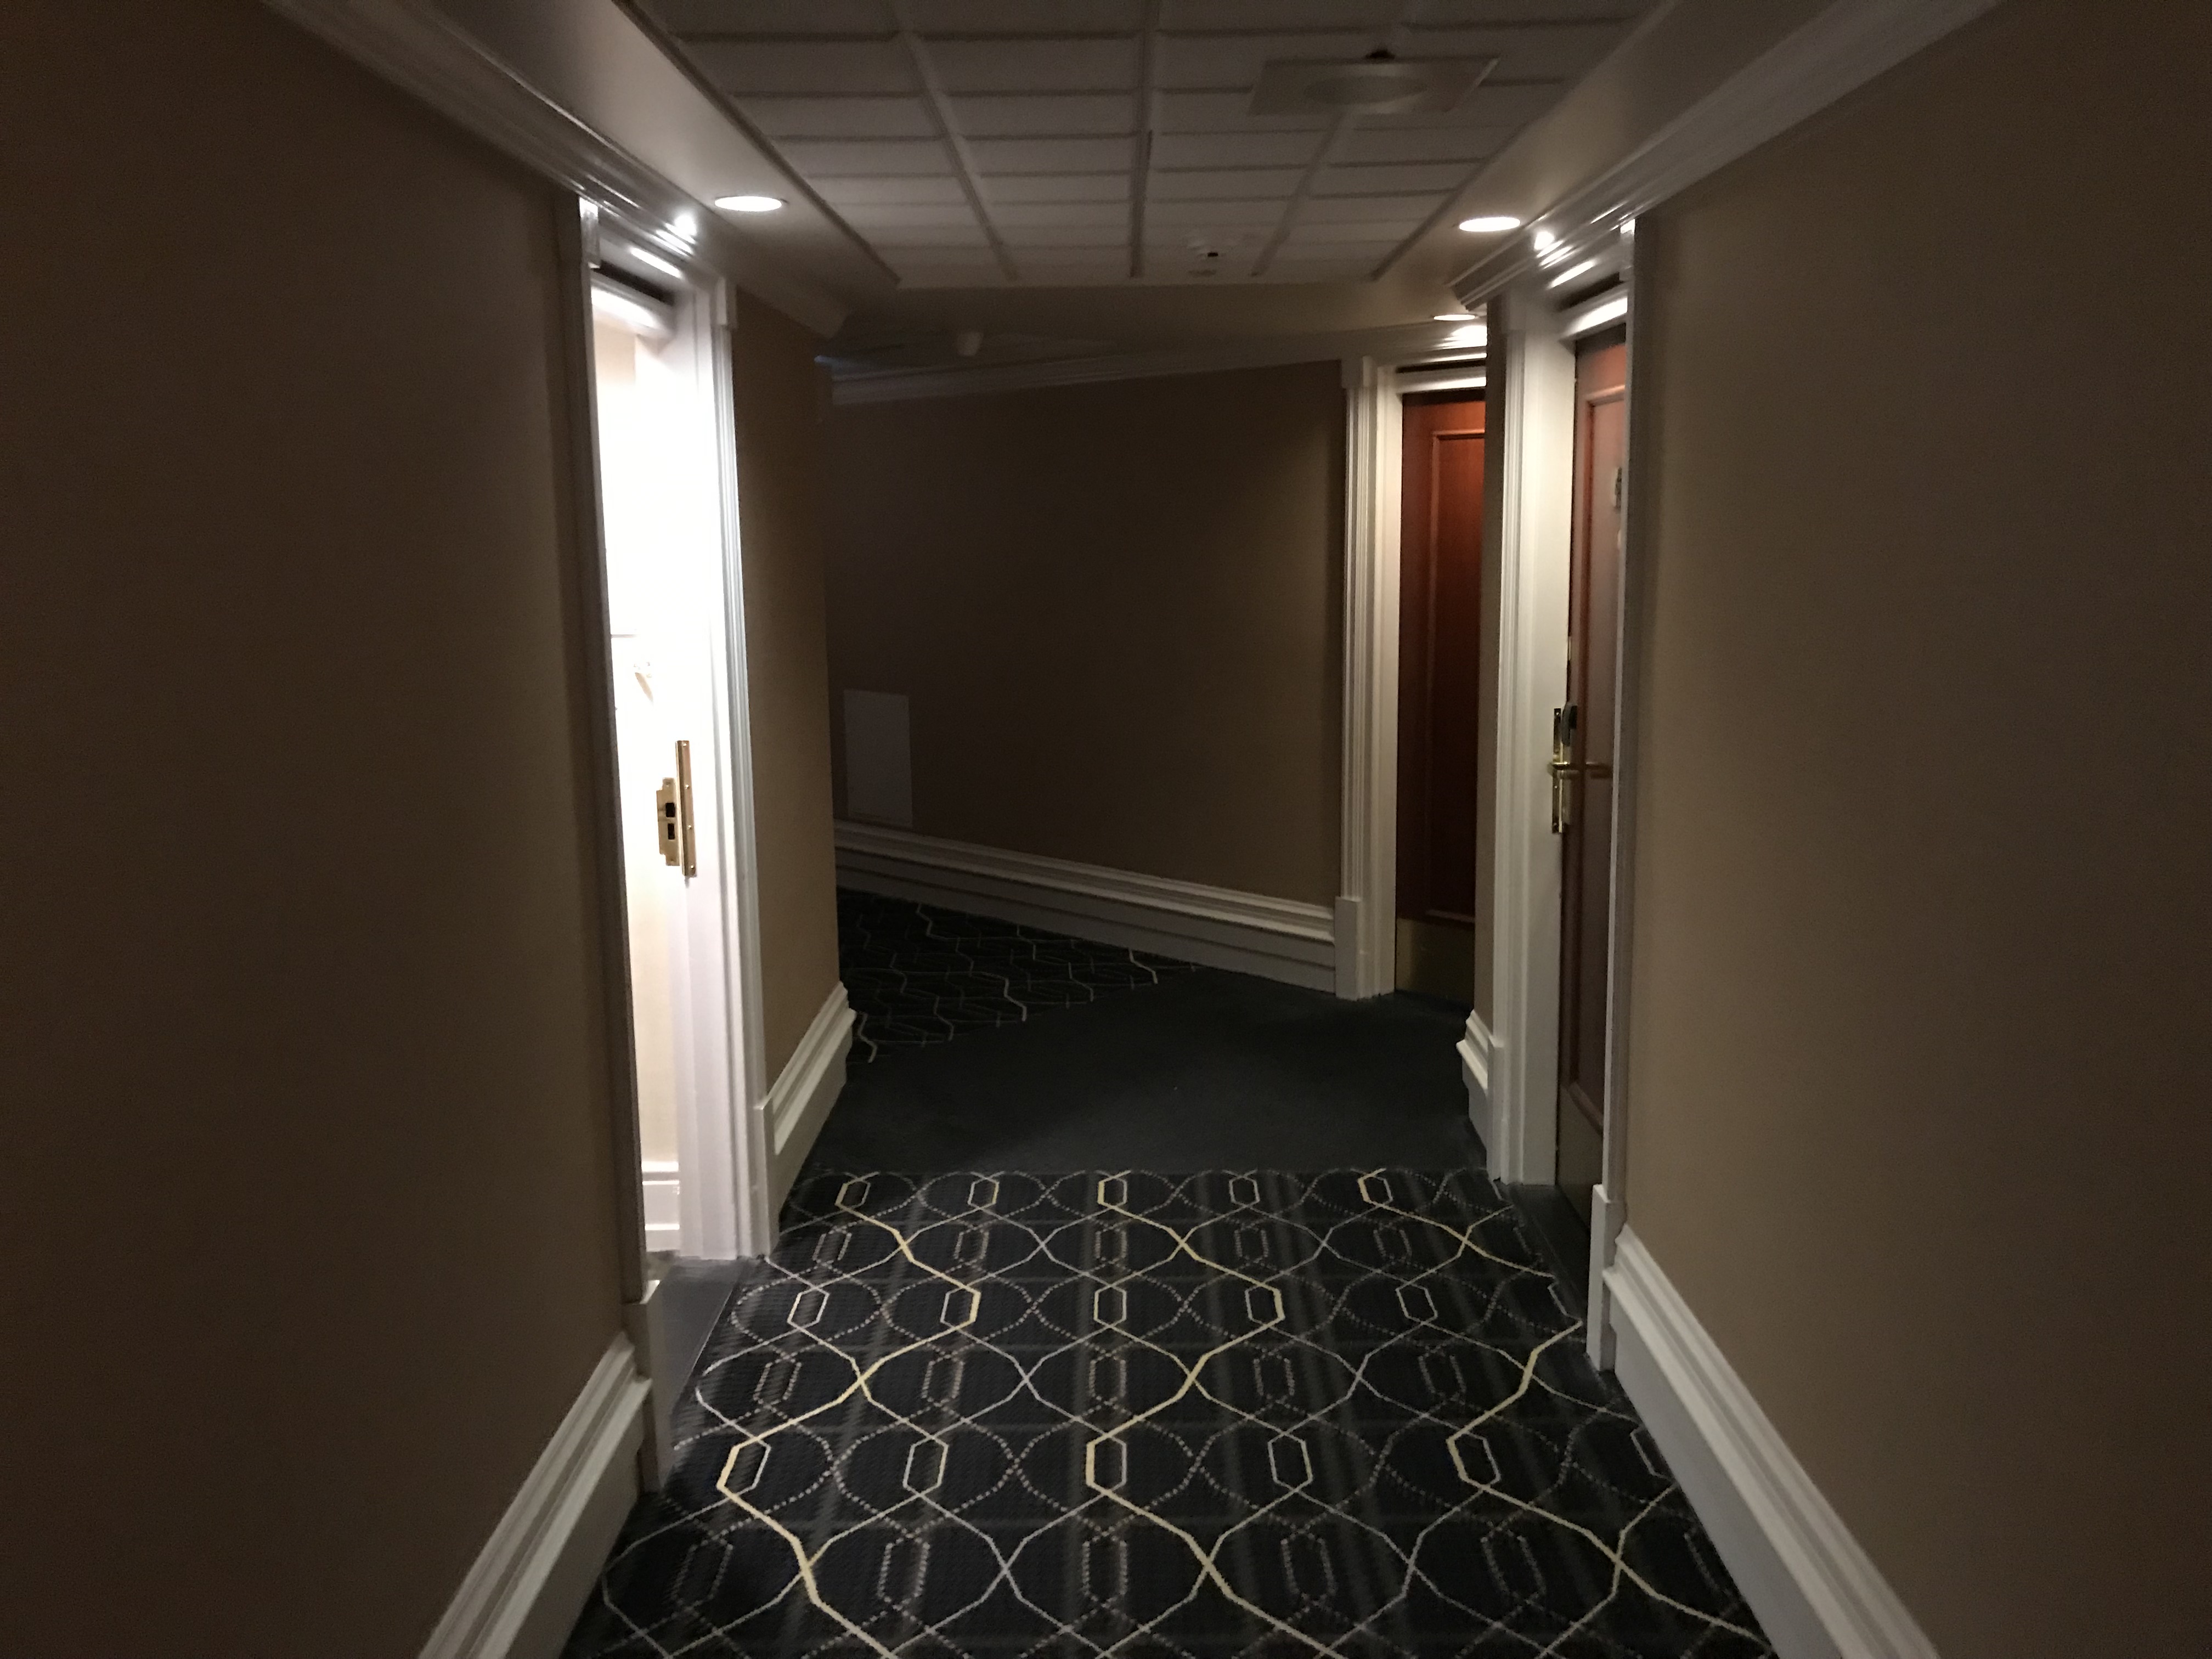 Is Room 873 Of The Banff Springs Hotel Haunted